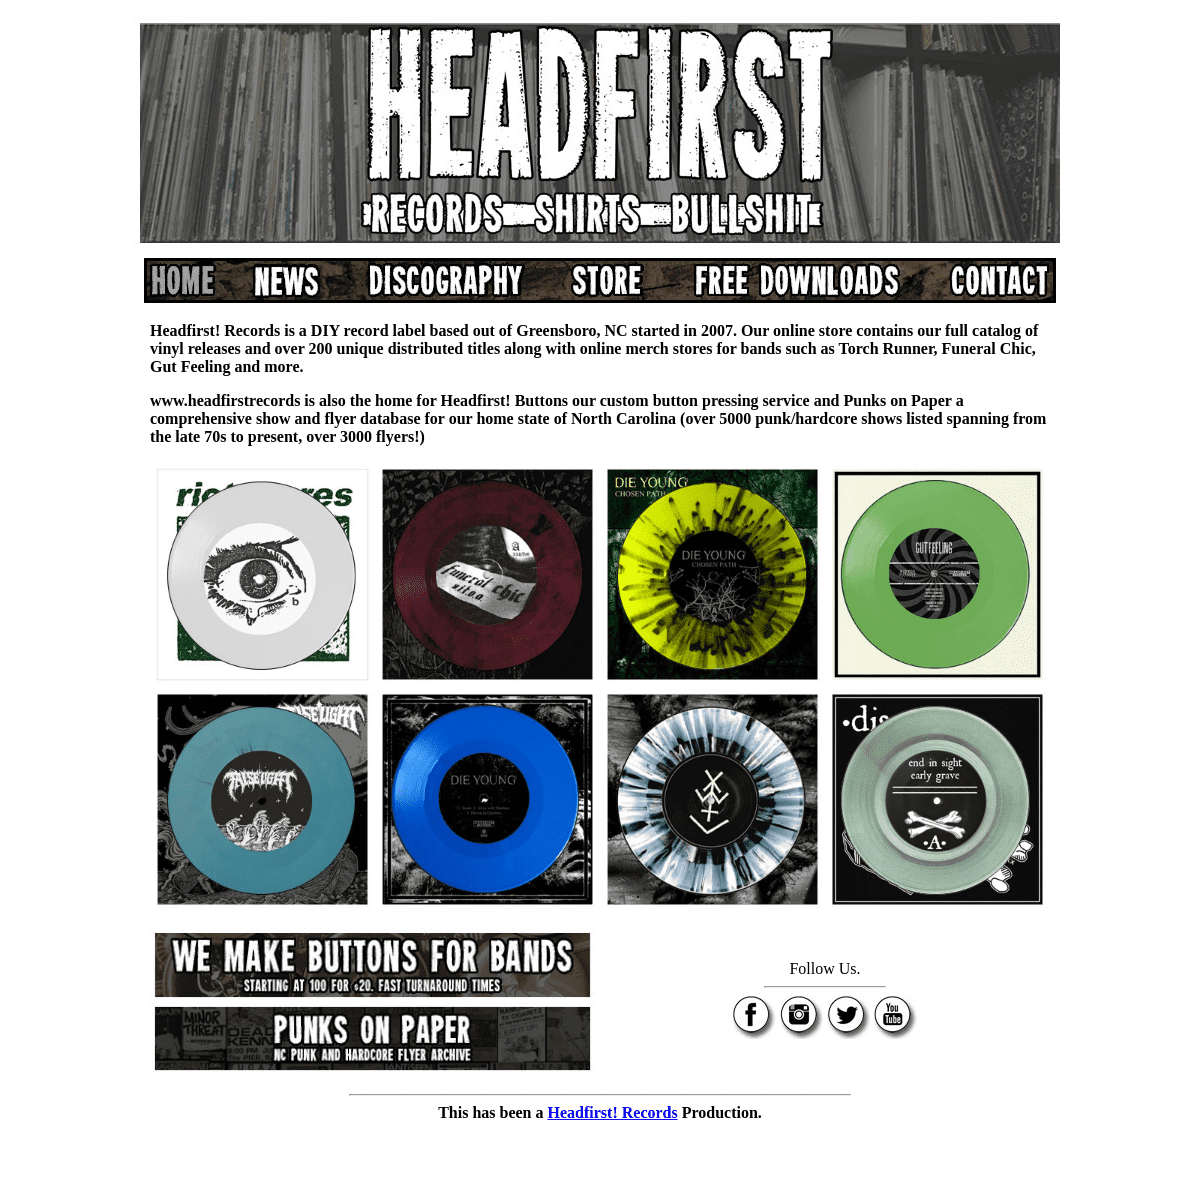 A complete backup of headfirstrecords.com